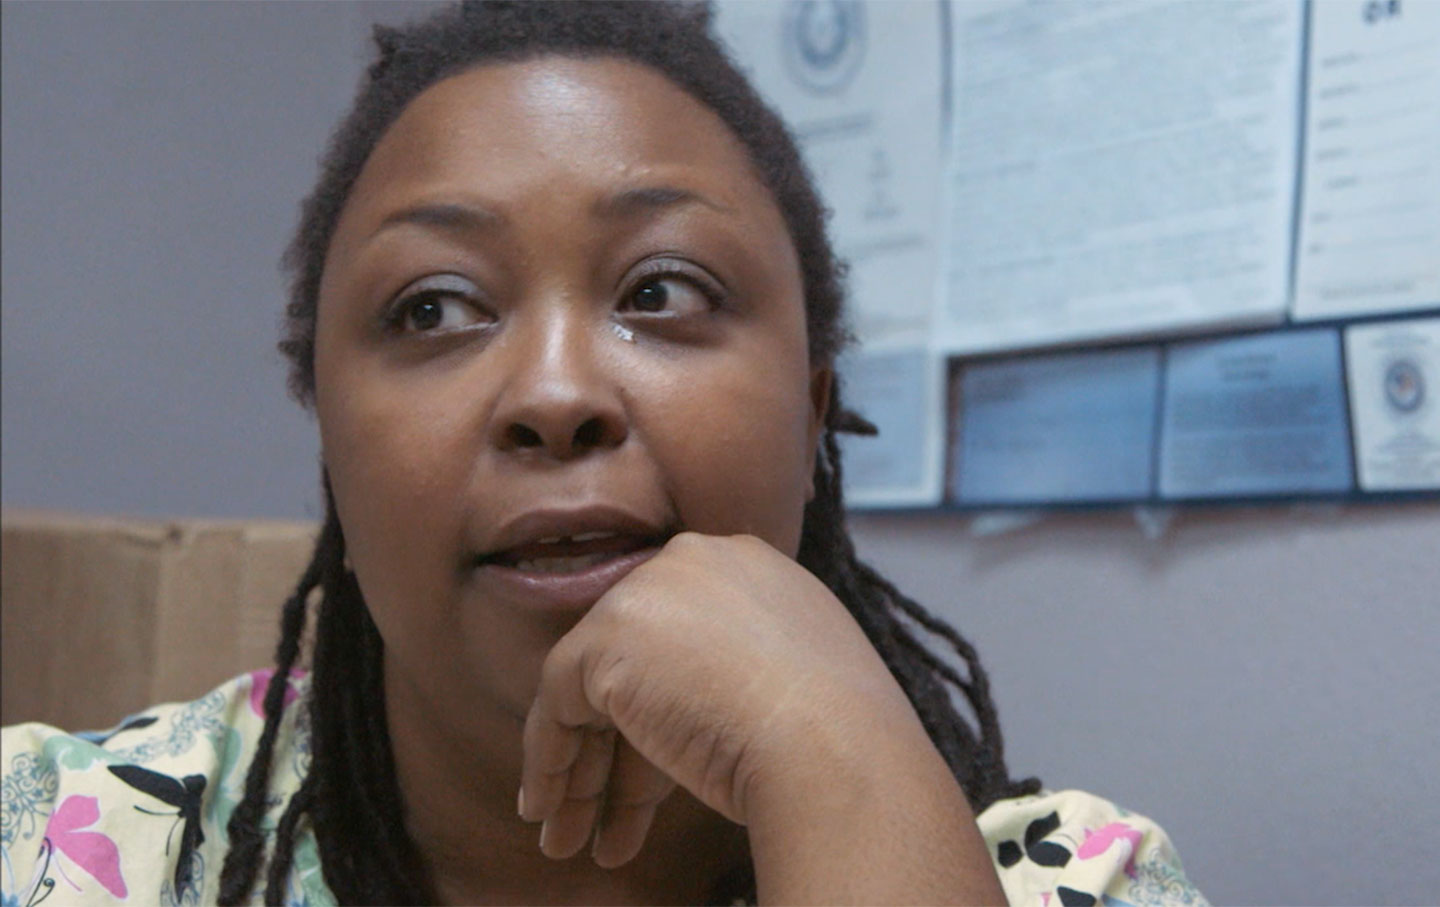 VIDEO: Abortion Providers Know Who Suffers Most When Their Clinics Are Forced to Close